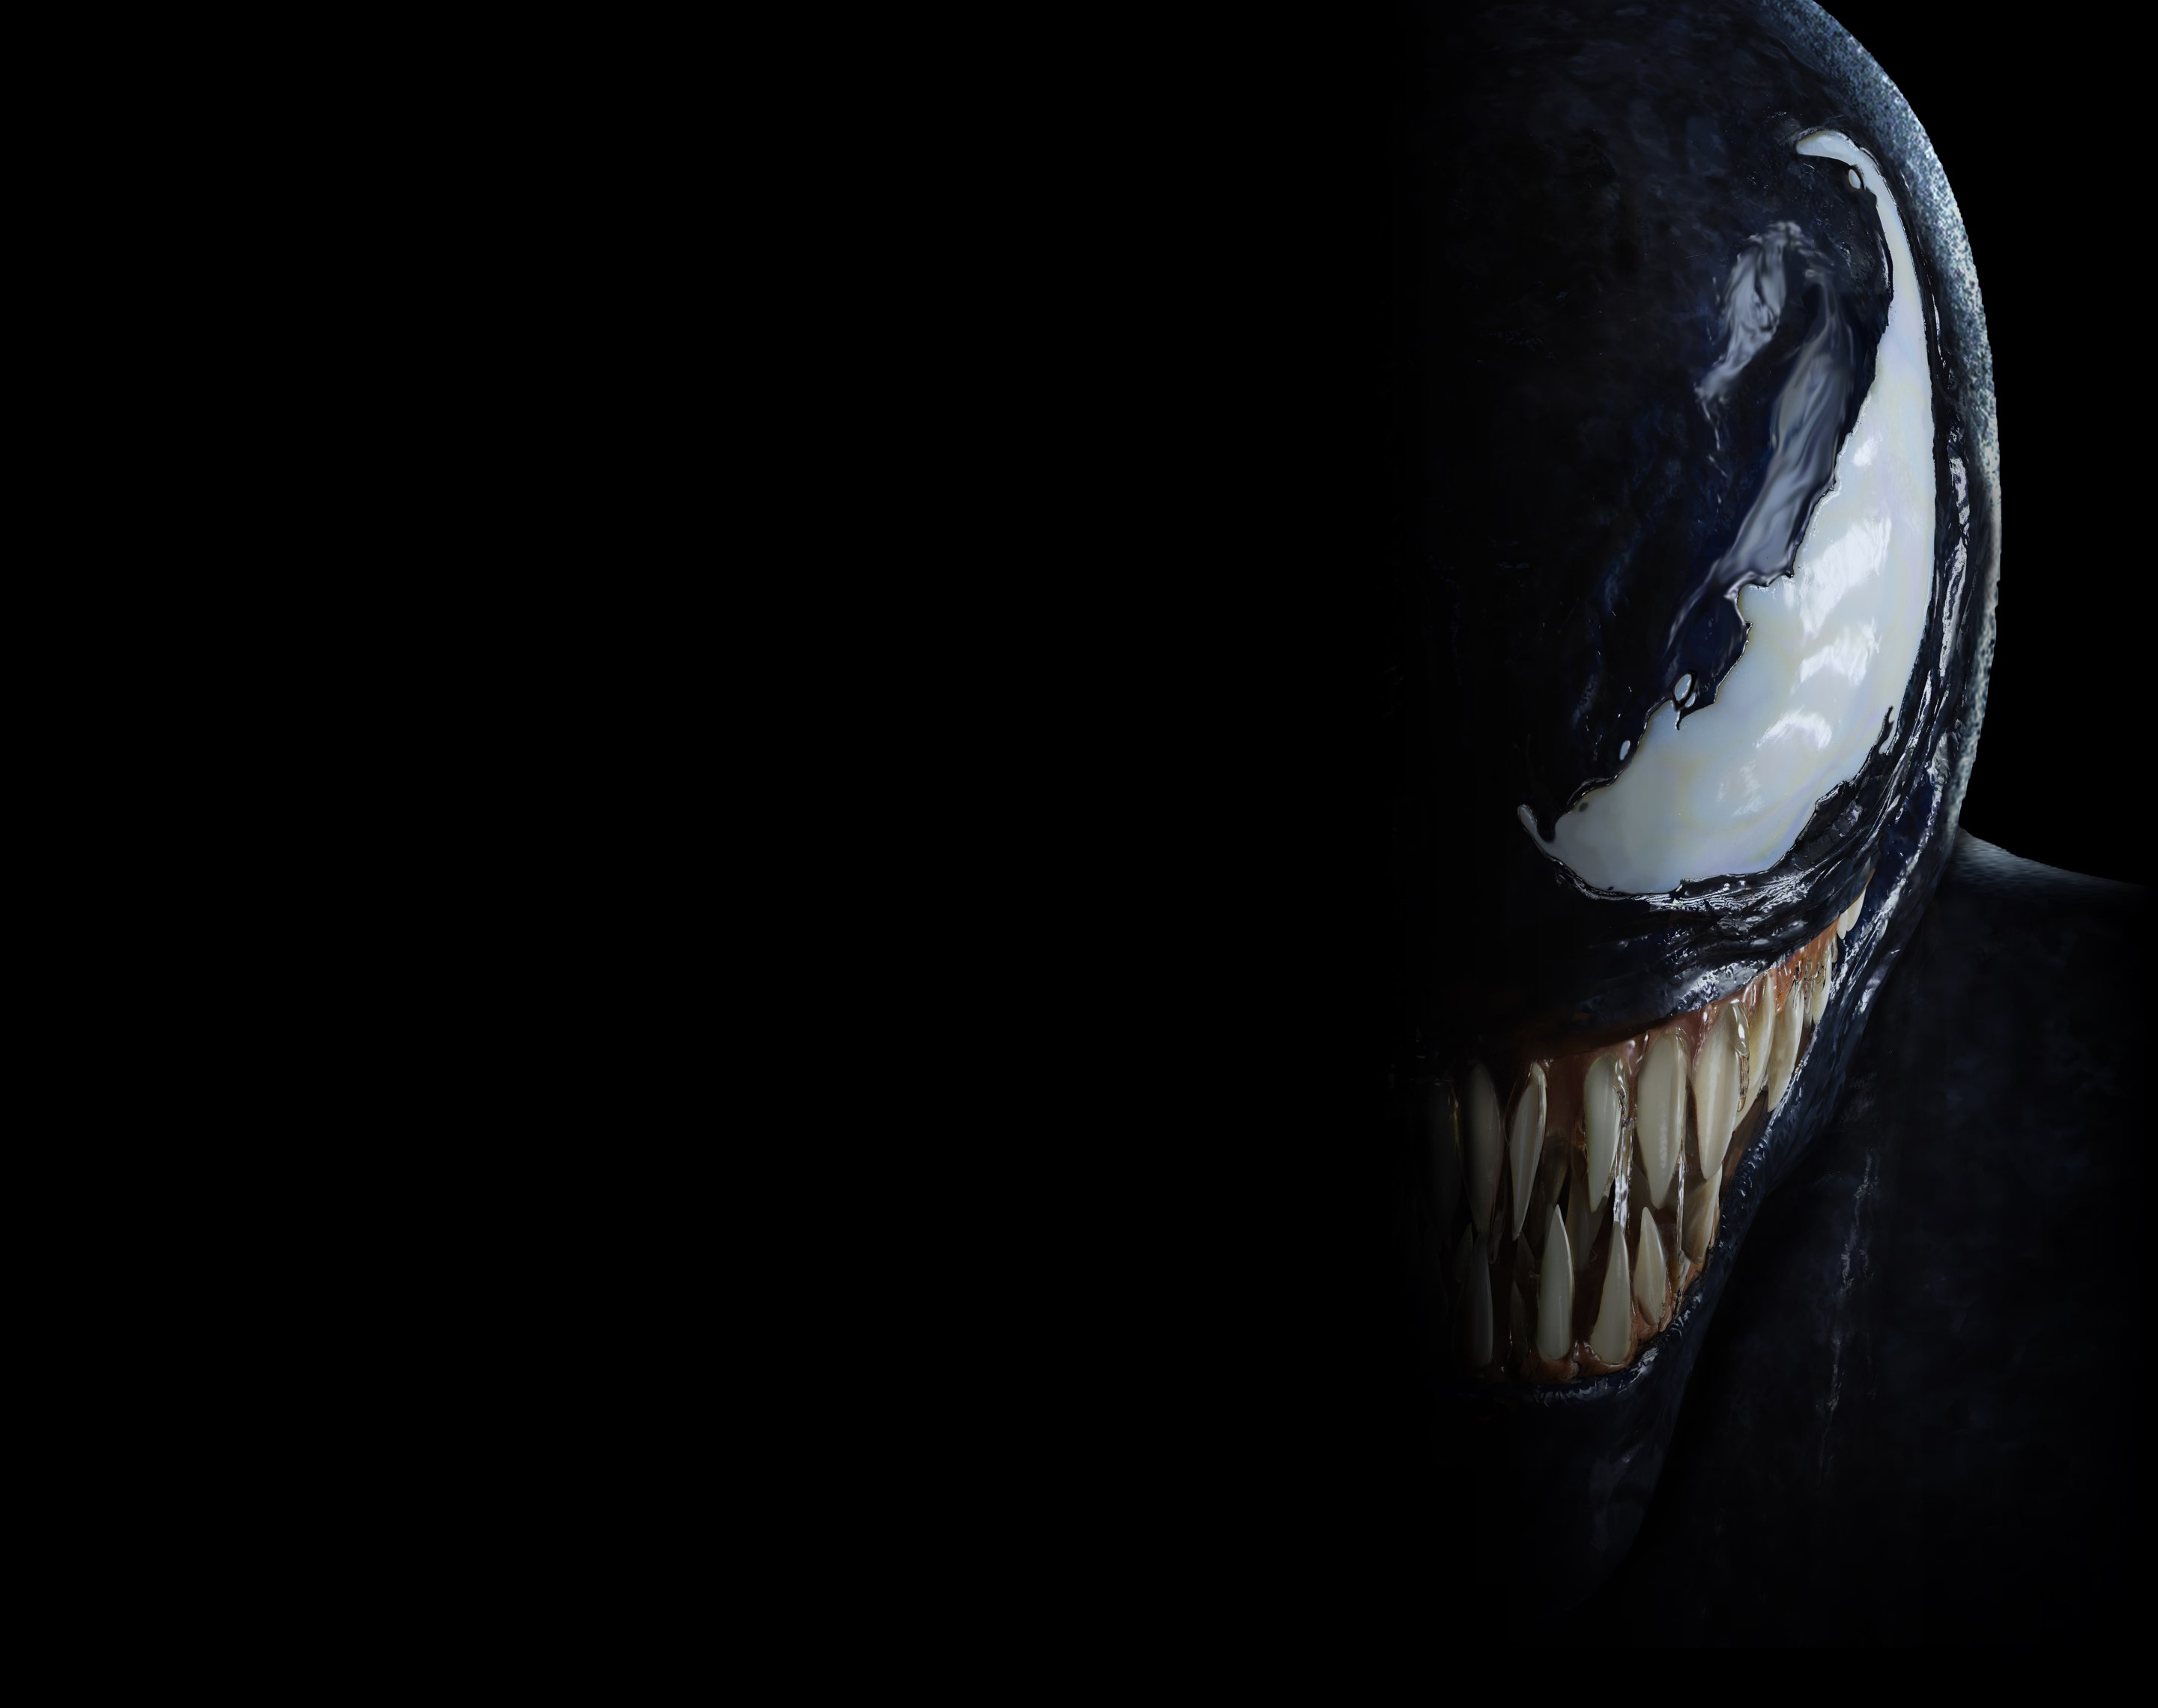 Venom Movie Text-Less Poster Wallpapers